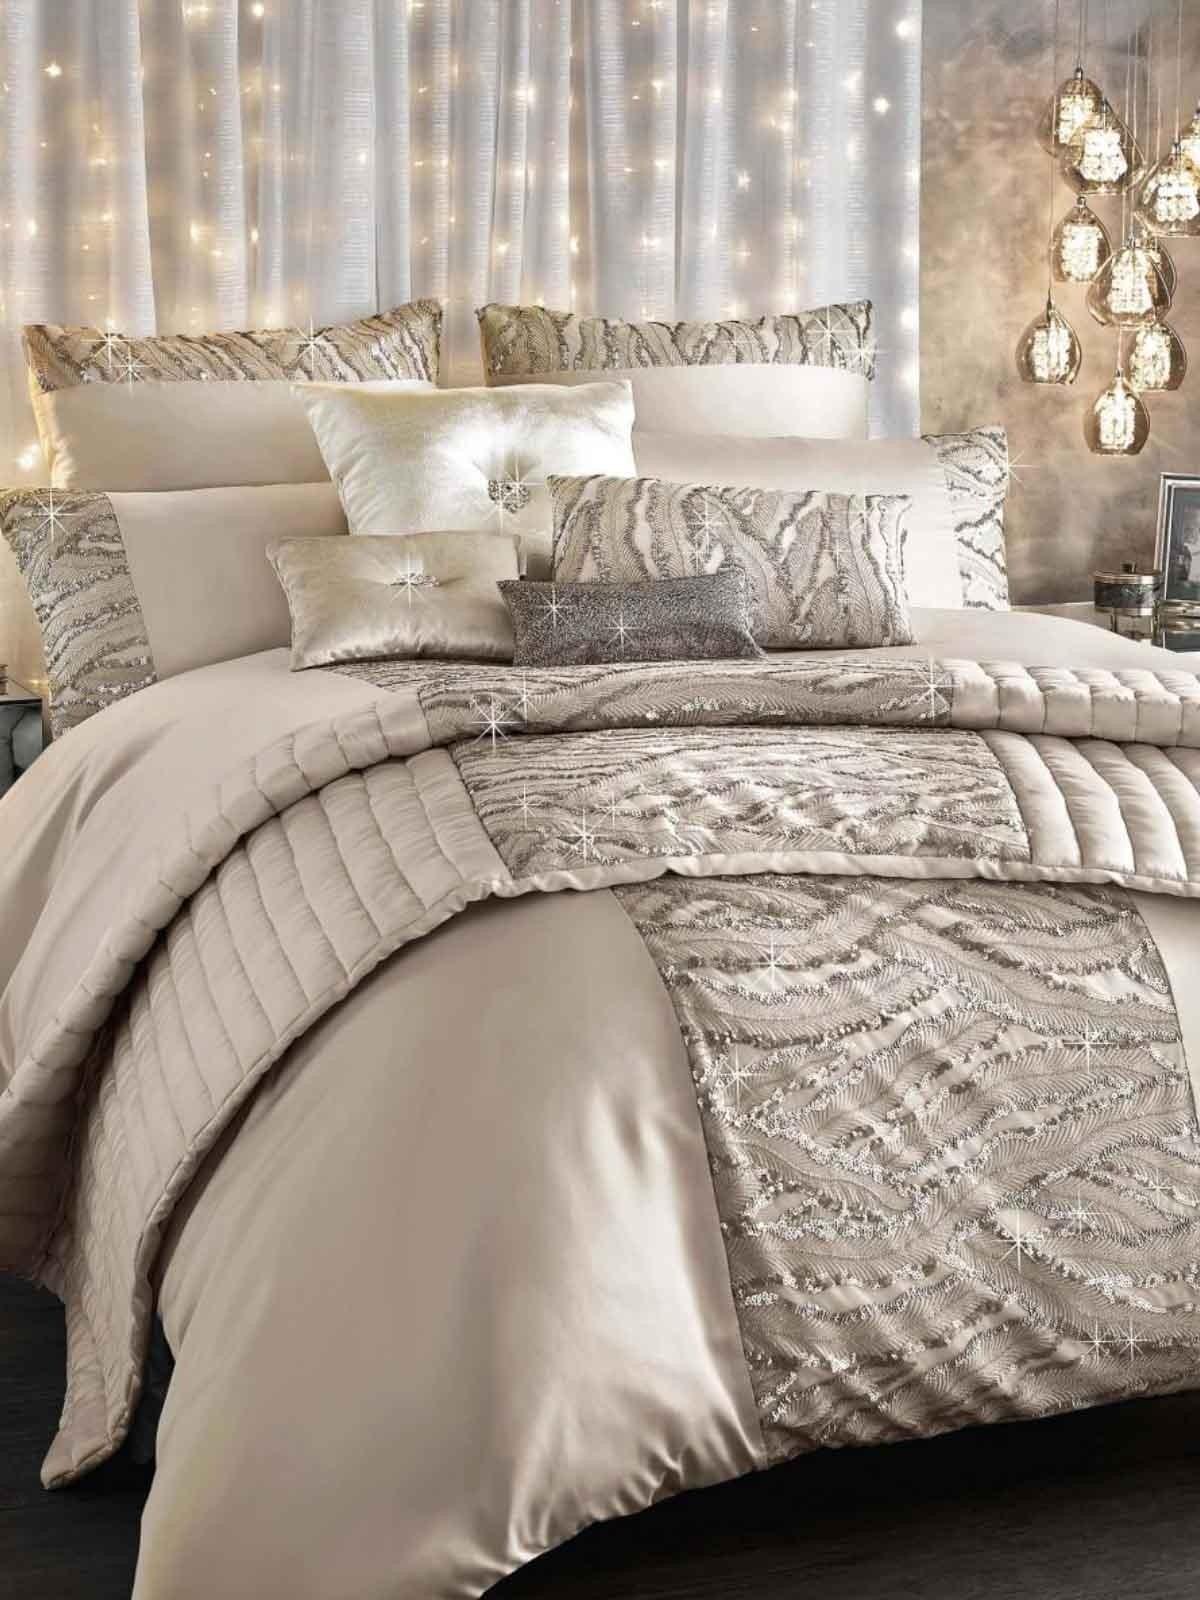 Kylie Minogue Celeste Bedding Collection Shell Ponden Home